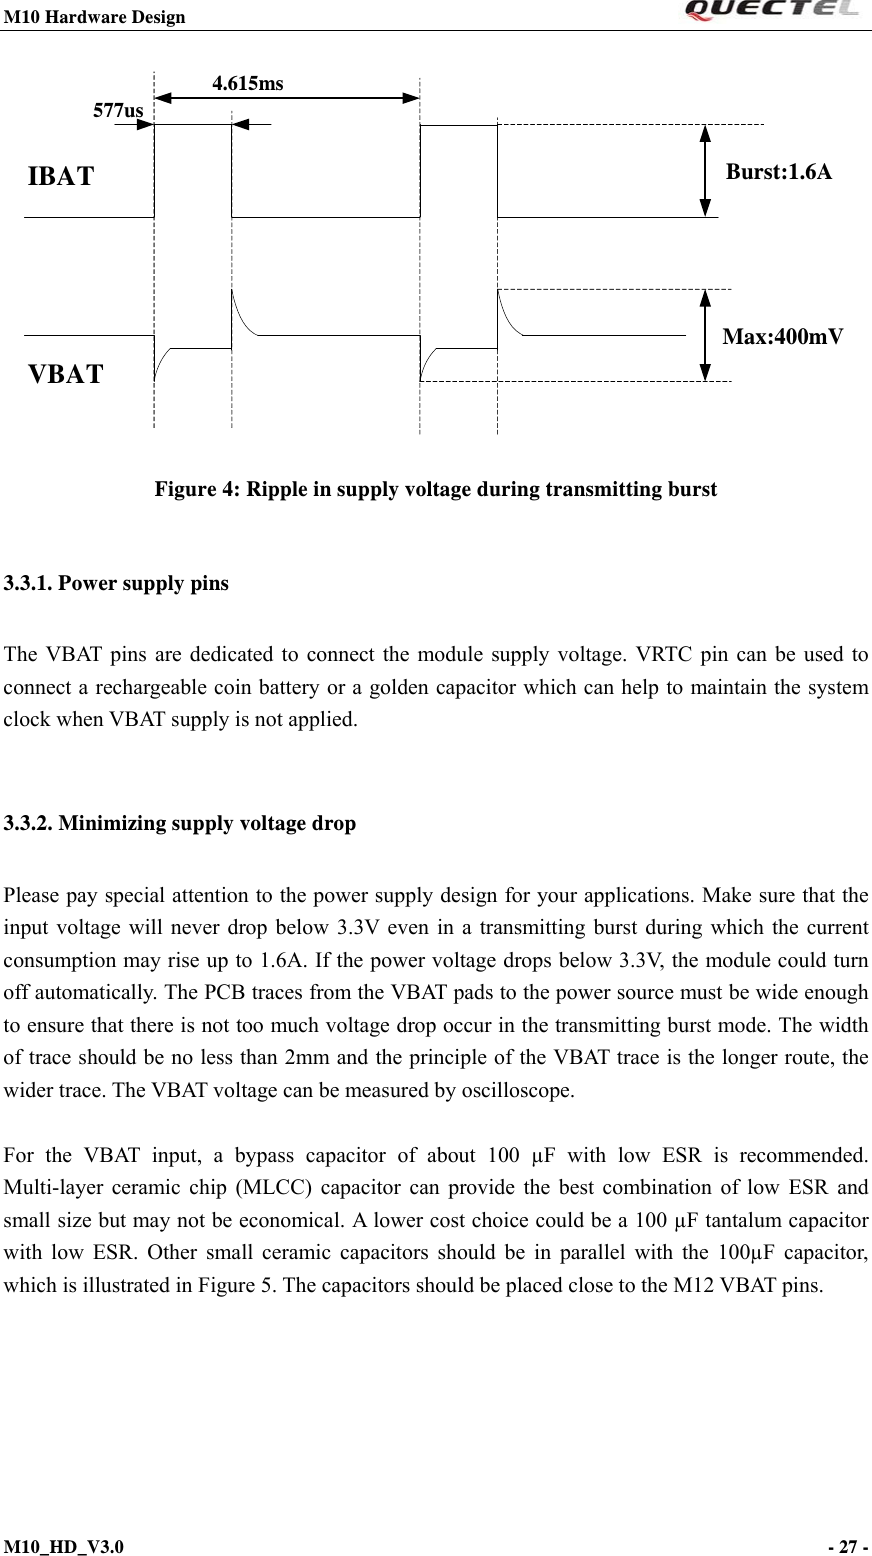 M10 Hardware Design                                                                 M10_HD_V3.0                                                                      - 27 -  Max:400mV4.615ms577usIBATVBATBurst:1.6A   Figure 4: Ripple in supply voltage during transmitting burst3.3.1. Power supply pins The VBAT pins are dedicated to connect the module supply voltage. VRTC pin can be used to connect a rechargeable coin battery or a golden capacitor which can help to maintain the system clock when VBAT supply is not applied.  3.3.2. Minimizing supply voltage drop Please pay special attention to the power supply design for your applications. Make sure that the input voltage will never drop below 3.3V even in a transmitting burst during which the current consumption may rise up to 1.6A. If the power voltage drops below 3.3V, the module could turn off automatically. The PCB traces from the VBAT pads to the power source must be wide enough to ensure that there is not too much voltage drop occur in the transmitting burst mode. The width of trace should be no less than 2mm and the principle of the VBAT trace is the longer route, the wider trace. The VBAT voltage can be measured by oscilloscope.  For the VBAT input, a bypass capacitor of about 100 µF with low ESR is recommended. Multi-layer ceramic chip (MLCC) capacitor can provide the best combination of low ESR and small size but may not be economical. A lower cost choice could be a 100 µF tantalum capacitor with low ESR. Other small ceramic capacitors should be in parallel with the 100µF capacitor, which is illustrated in Figure 5. The capacitors should be placed close to the M12 VBAT pins. 